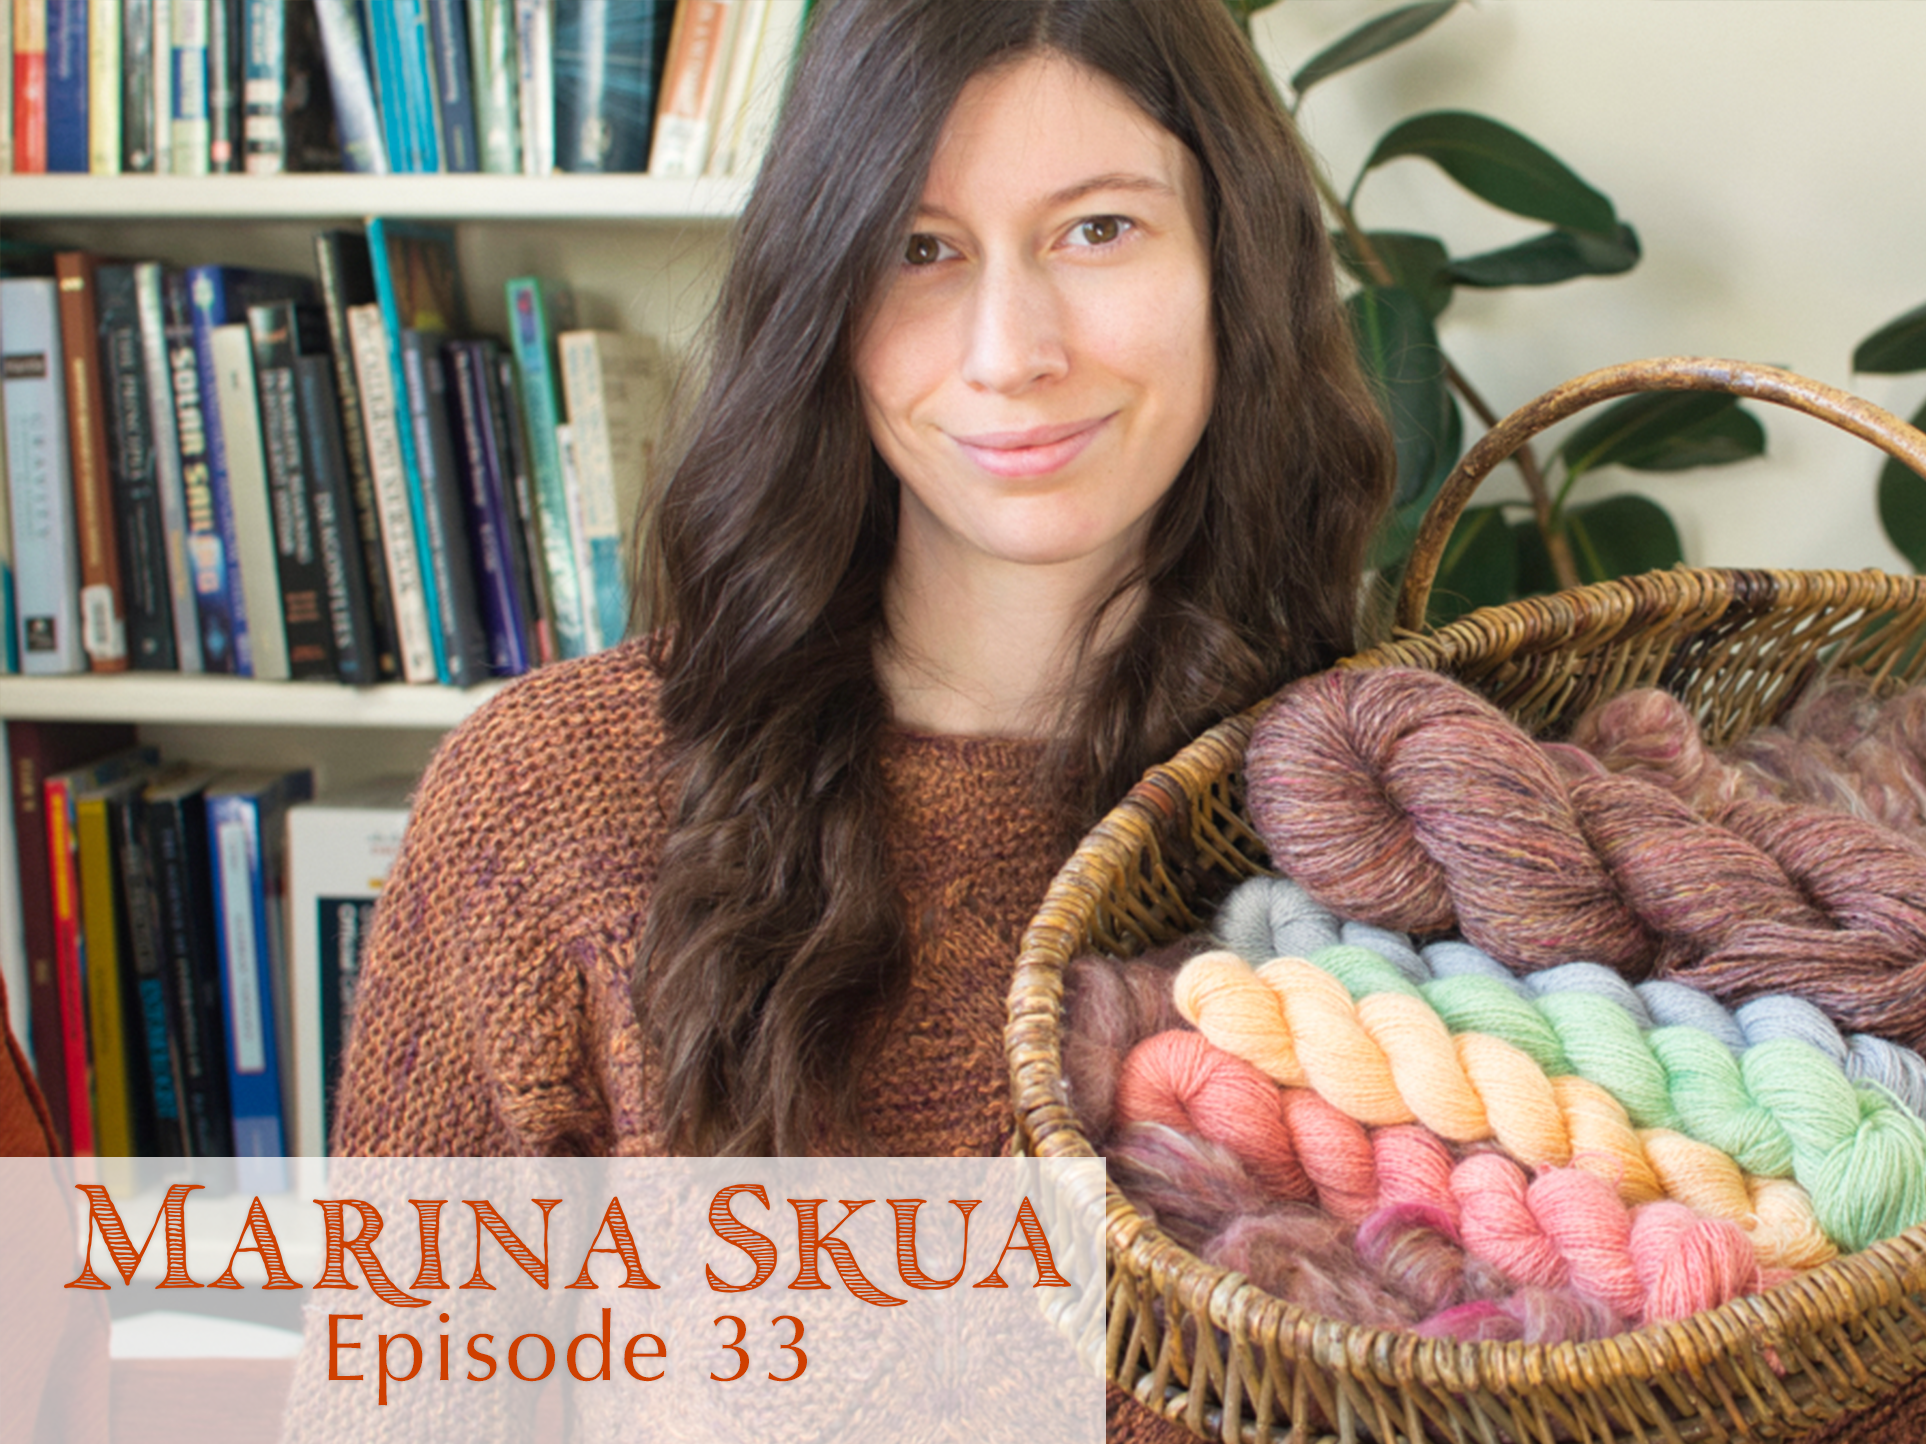 Episode 33 of the podcast – Longing for sun, new alpaca colours, summer knitting, spinning bold fibre blends